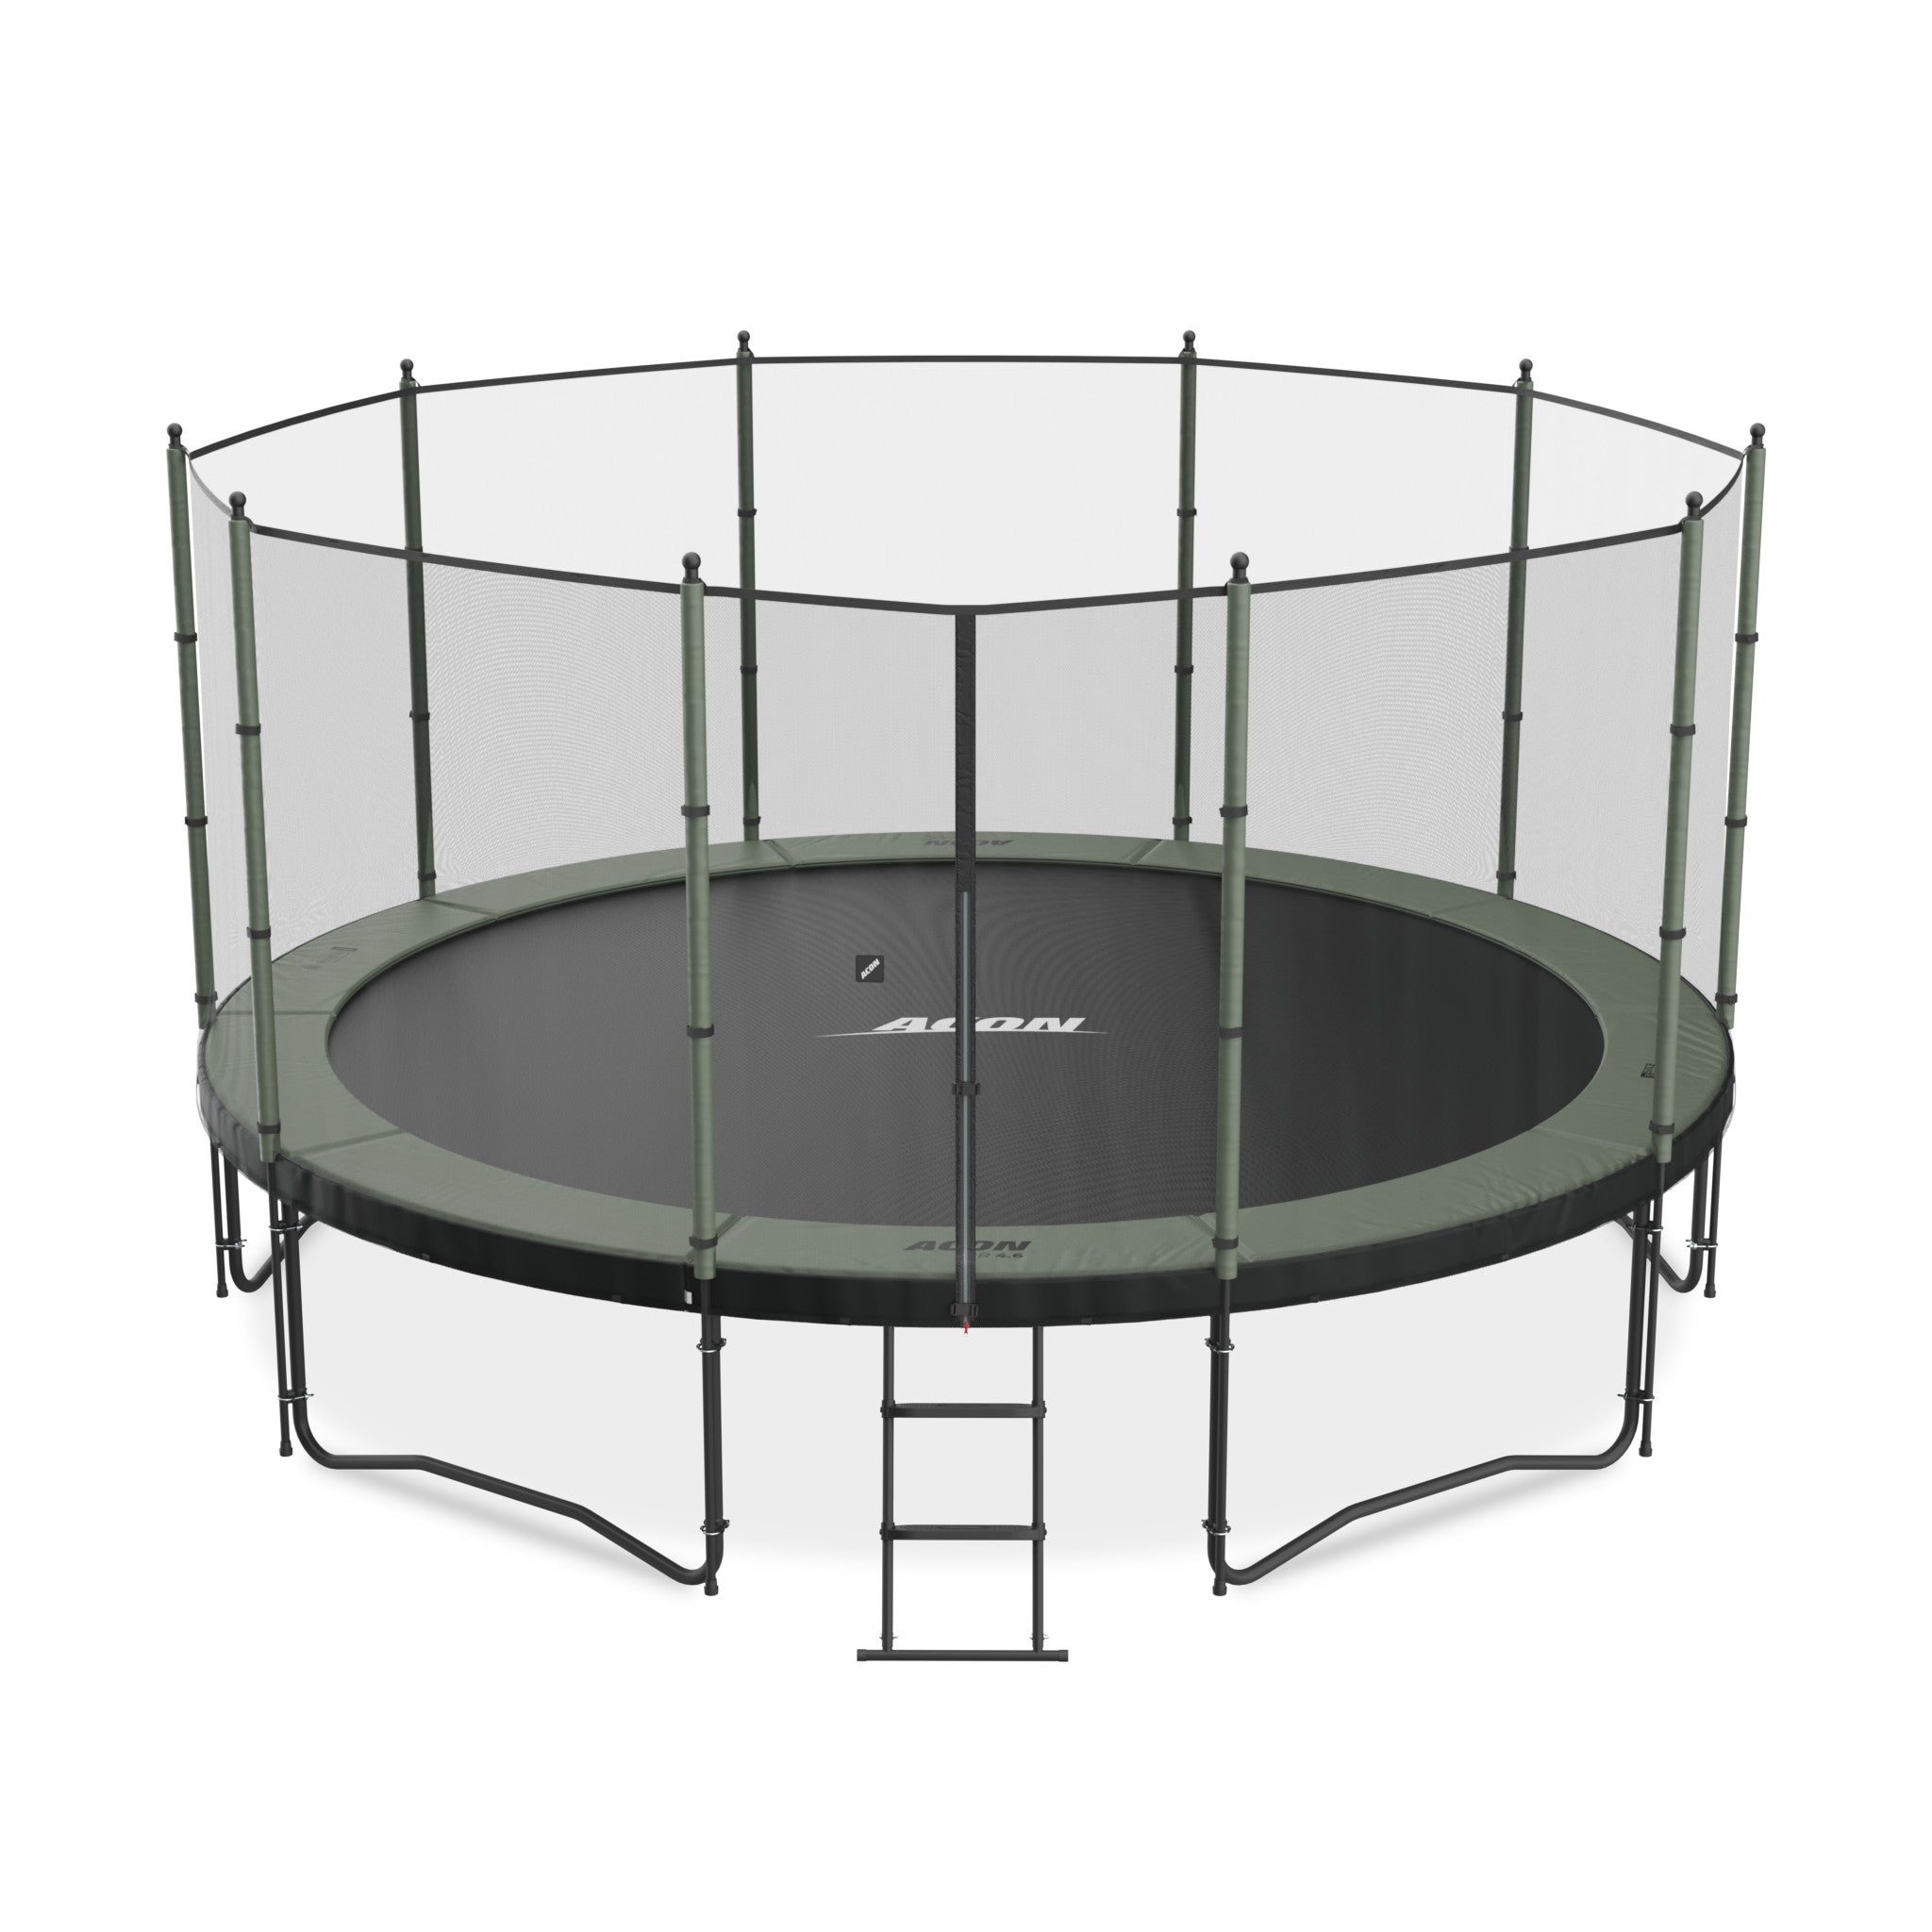 ACON Air 15ft Trampoline with Enclosure | now! – ACON USA